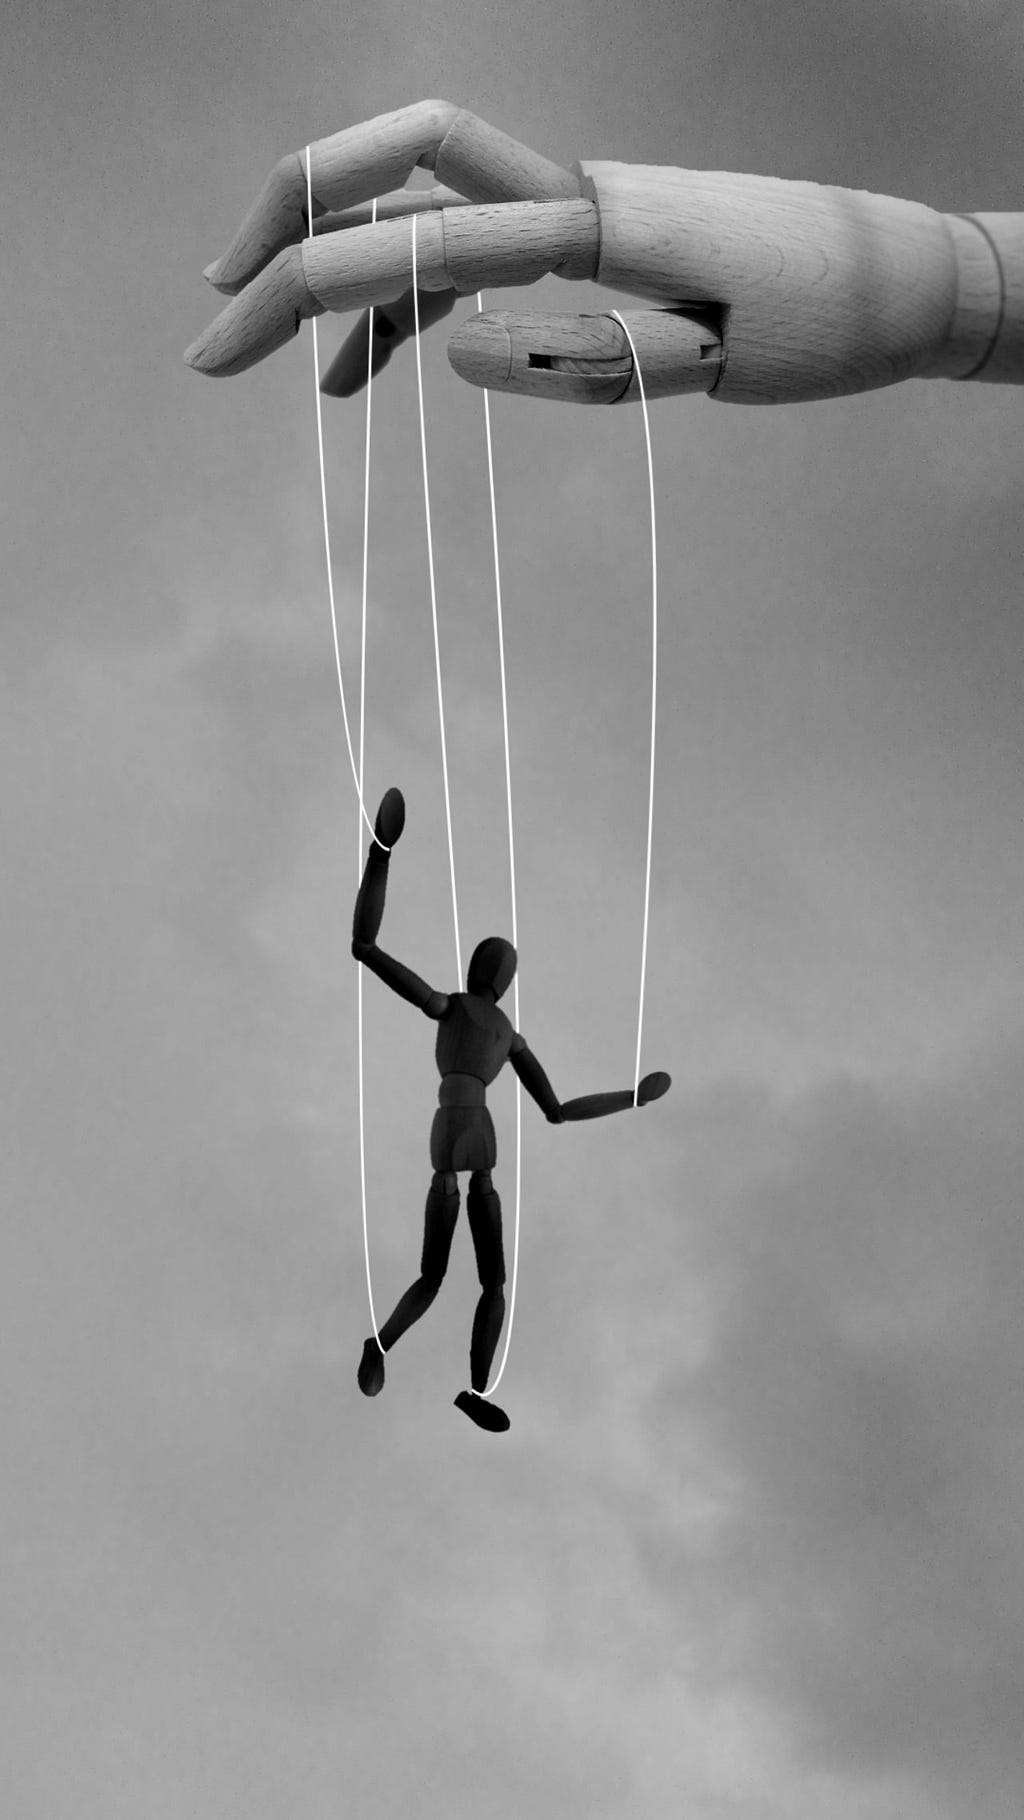 A wooden puppet on strings is controlled by above by a wooden hand.